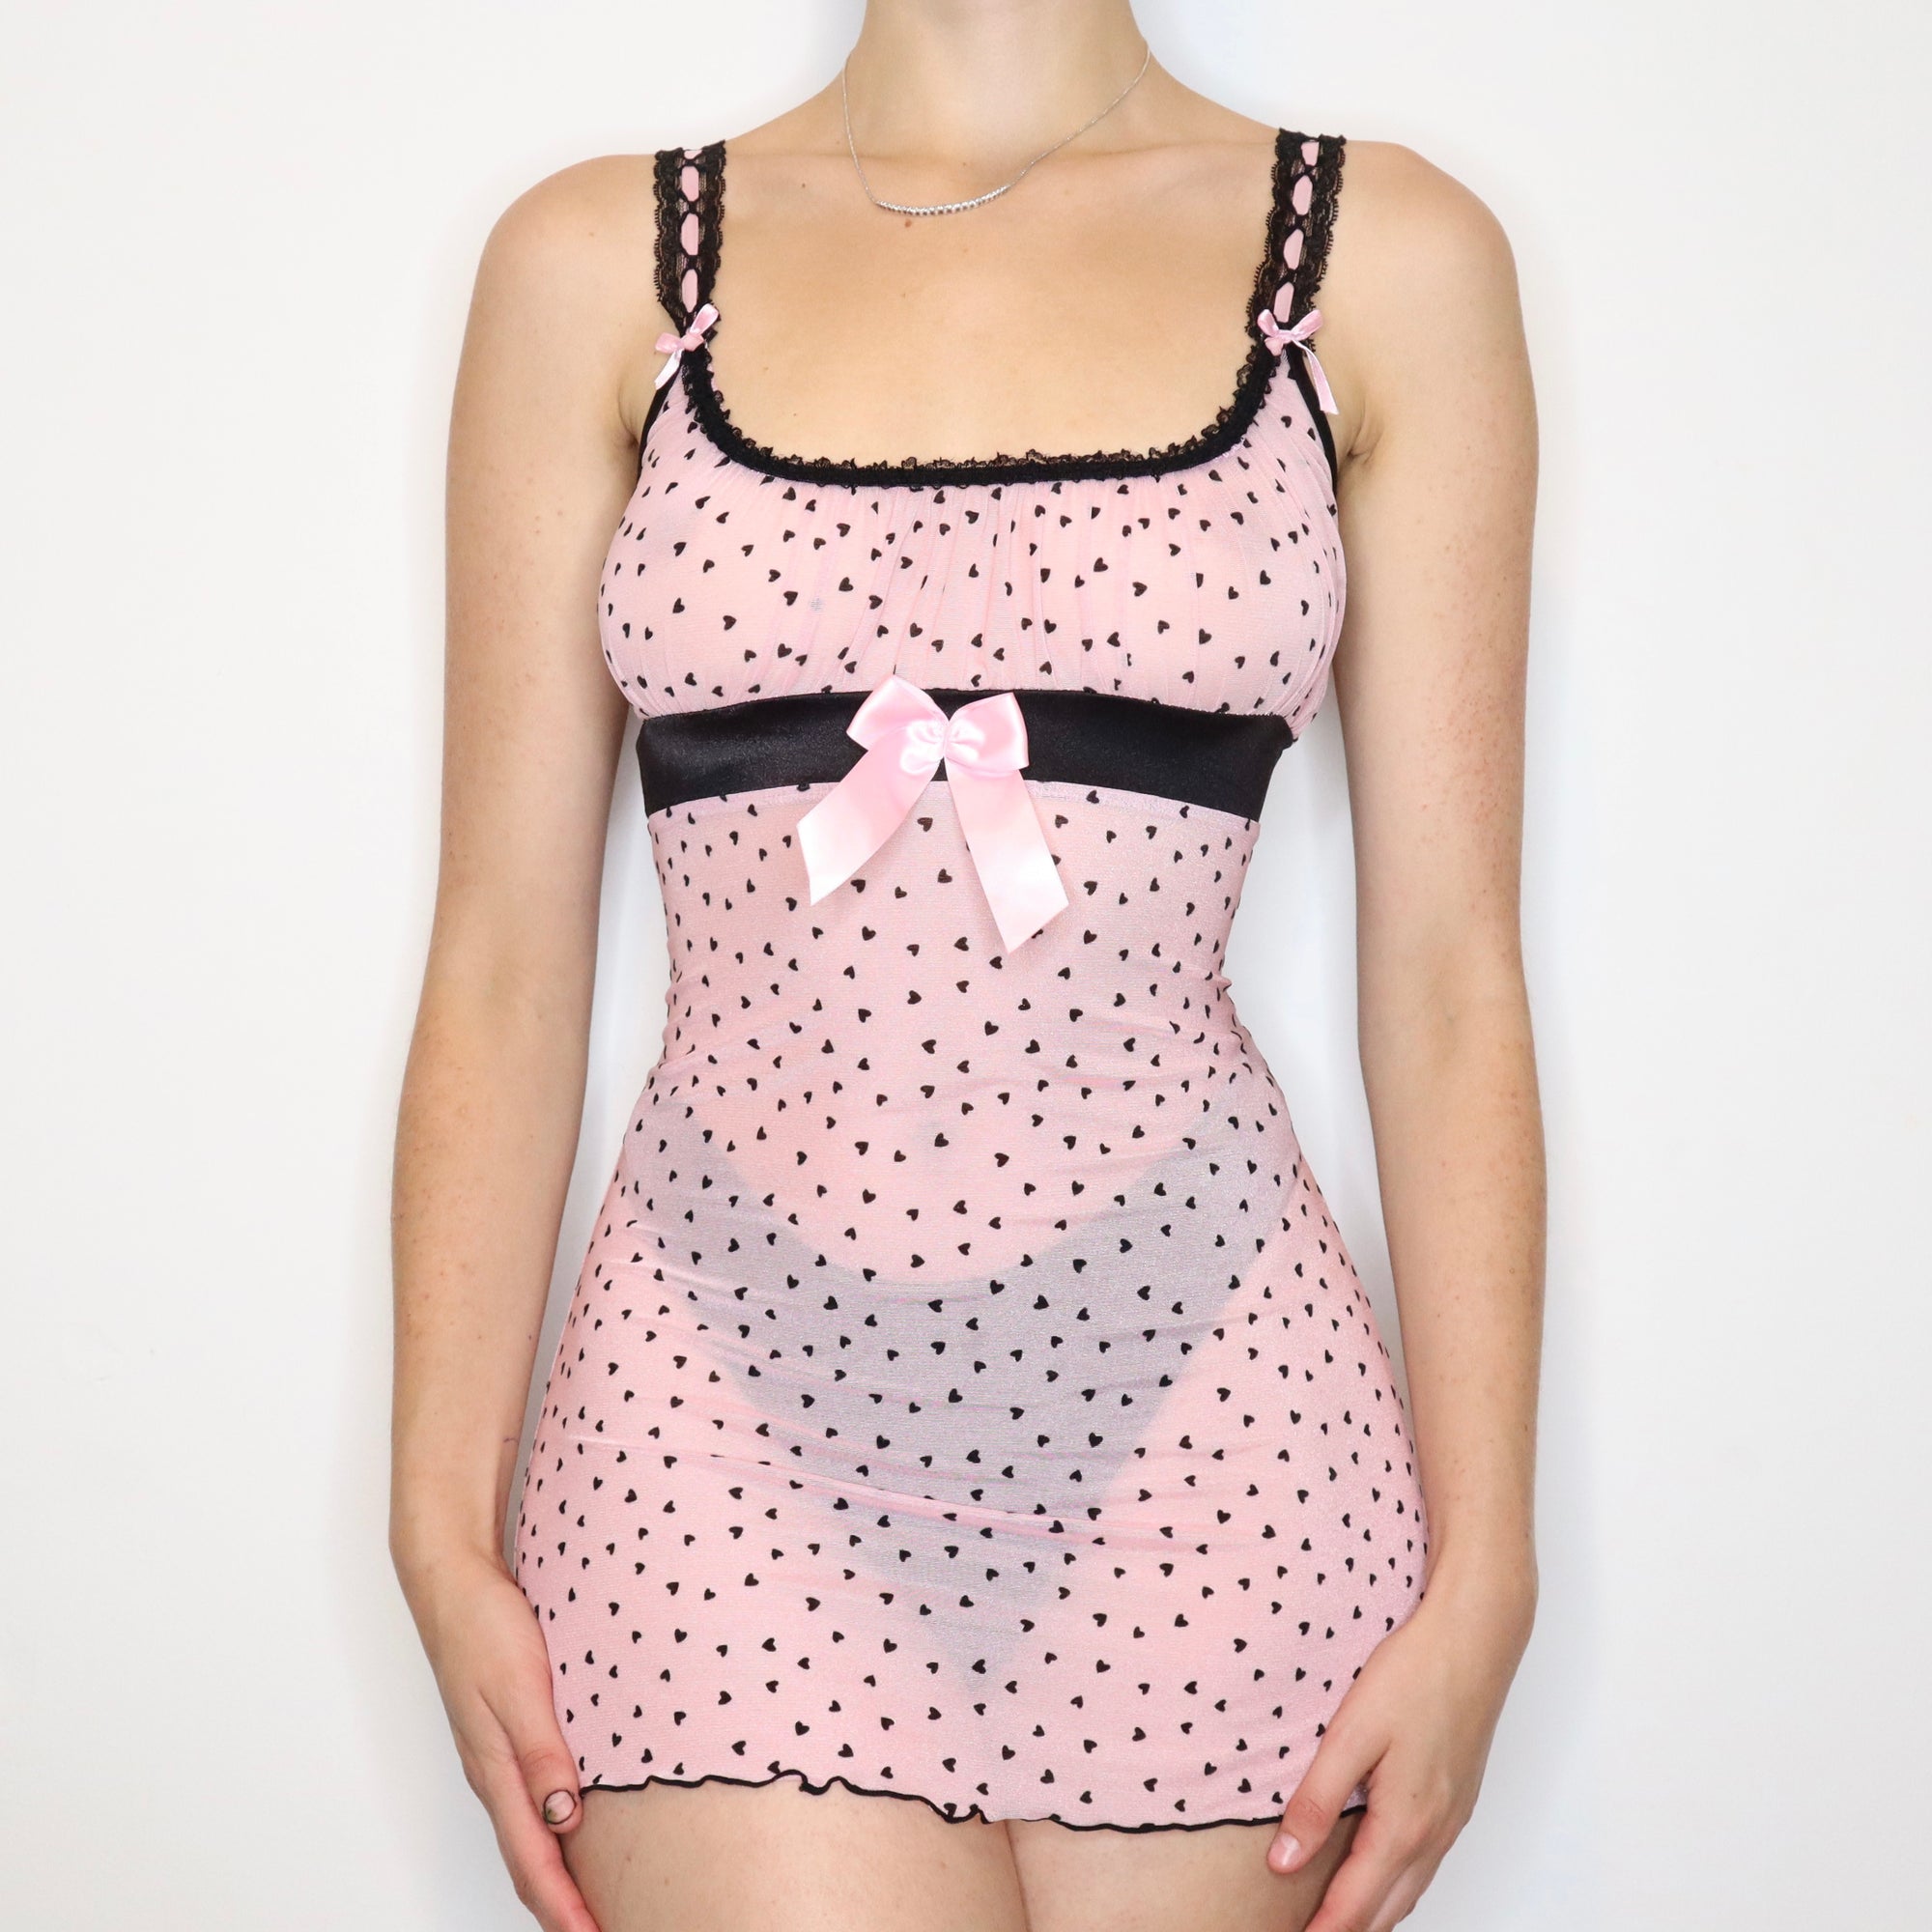 Vintage Early 2000s Baby Pink Hearts Milkmaid Slip Dress